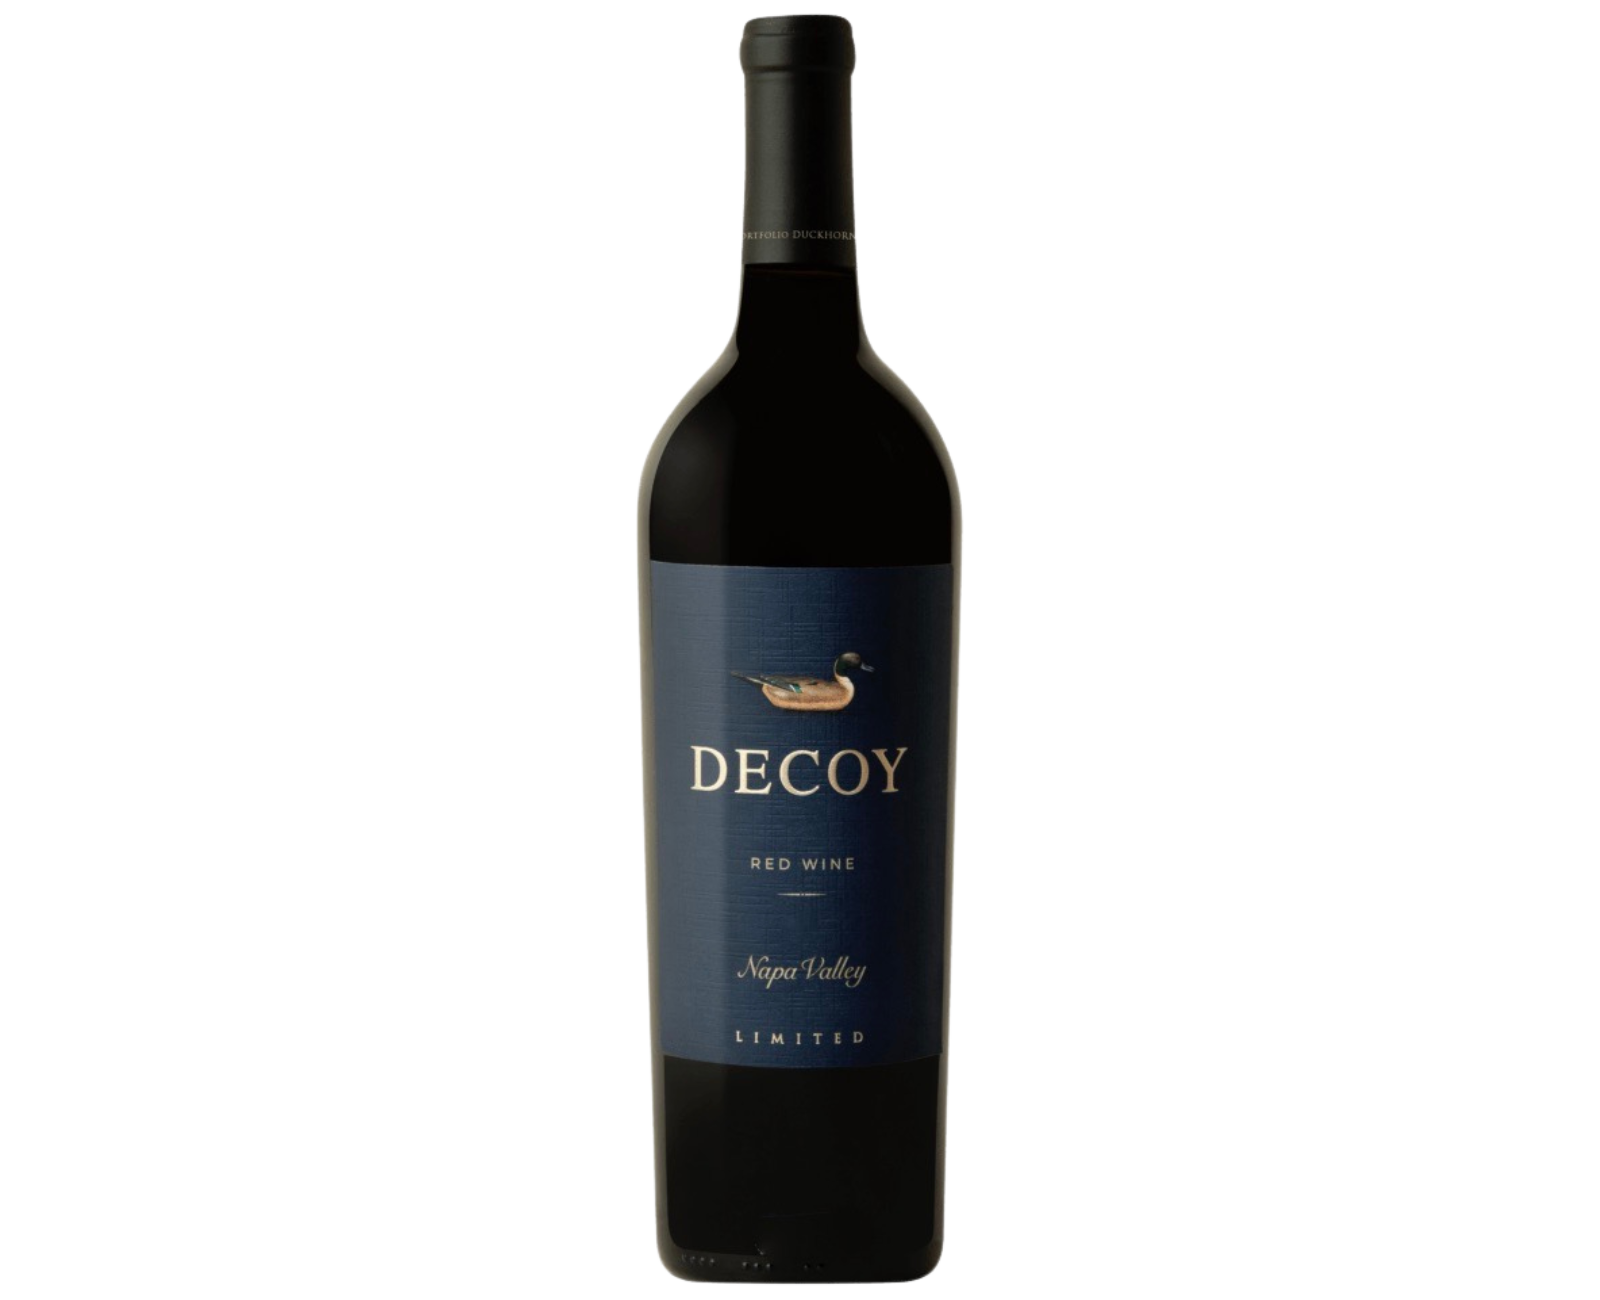 Decoy Limited 2019 Red Blend, Napa Valley